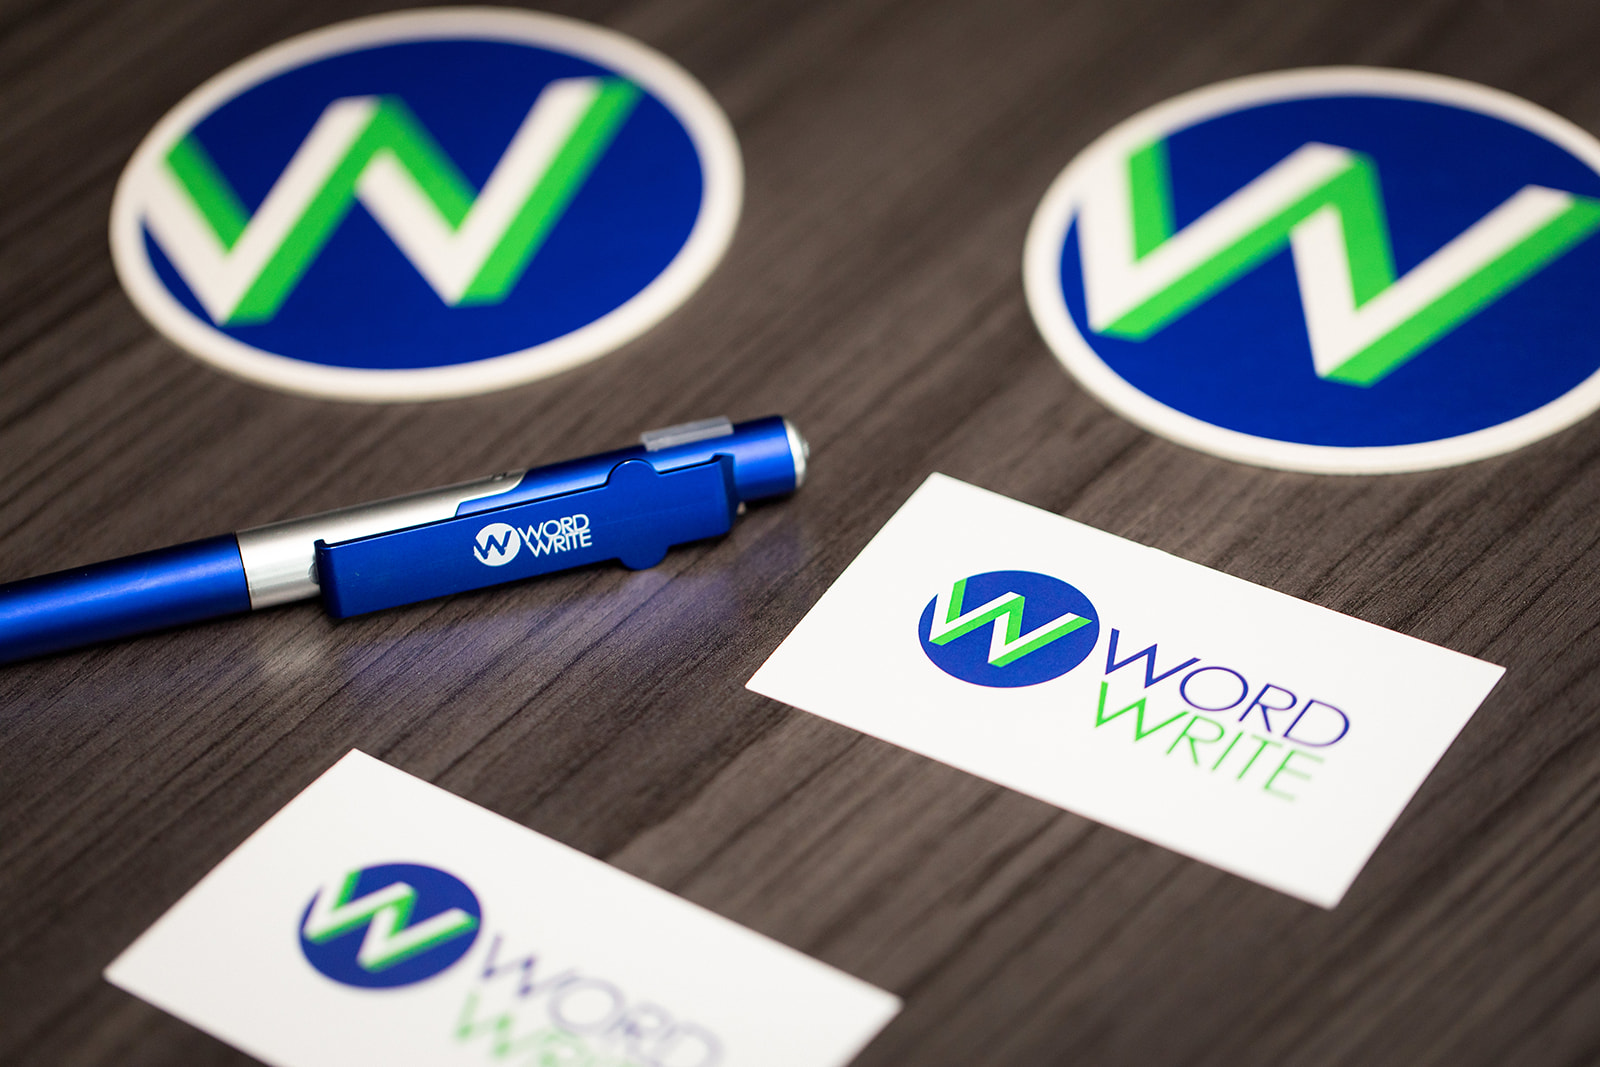 WordWrite branded pen and card